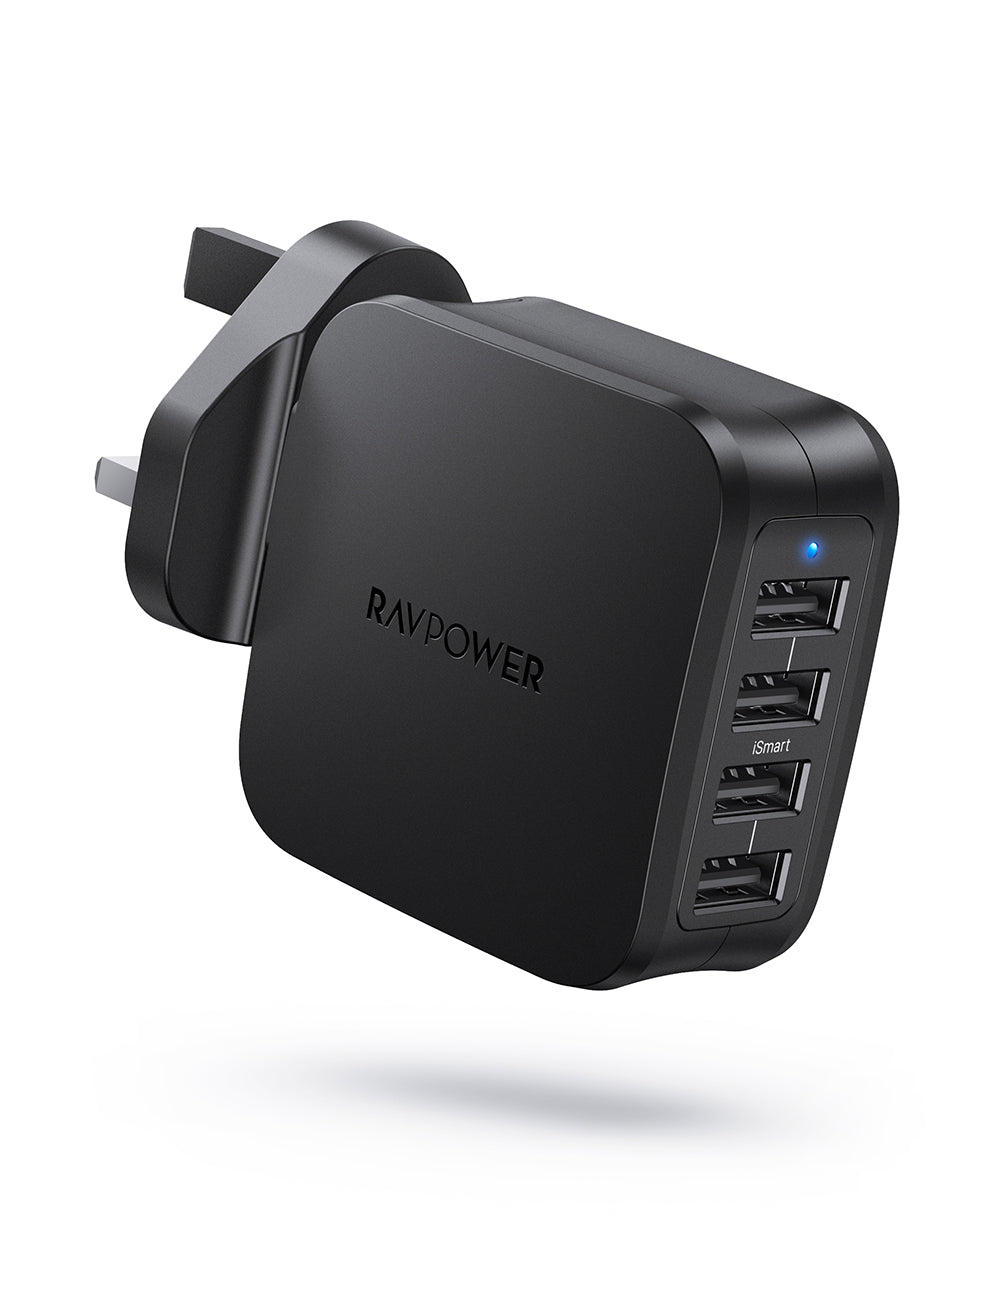 RAVPower - 40W 4-port Wall Charger